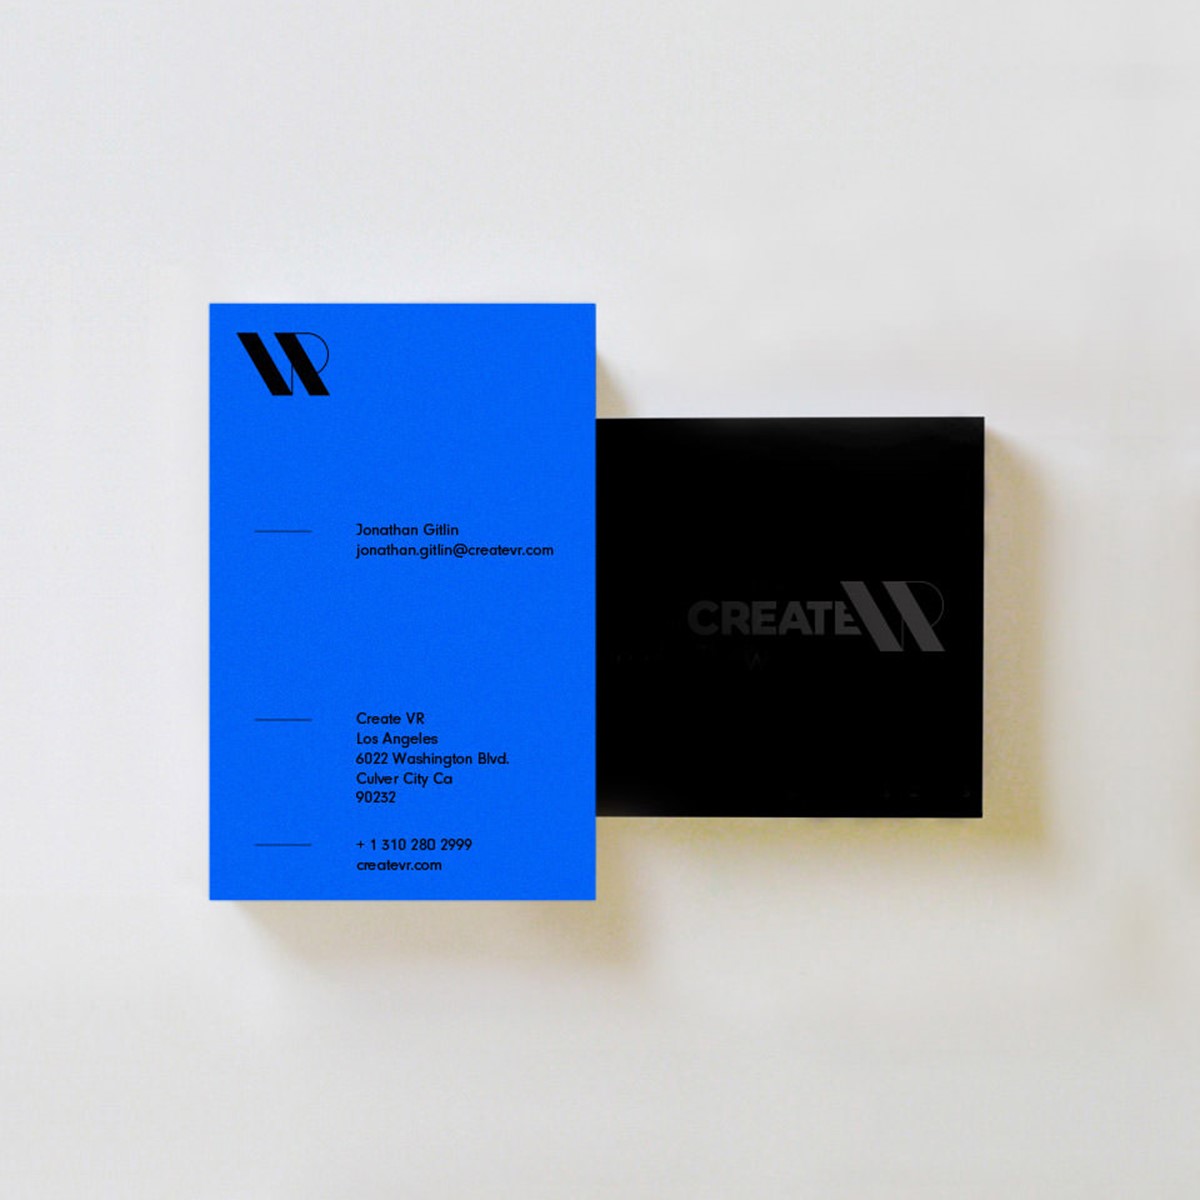 Create VR. Brand identity business cards mock-up. Designed by Superfried.